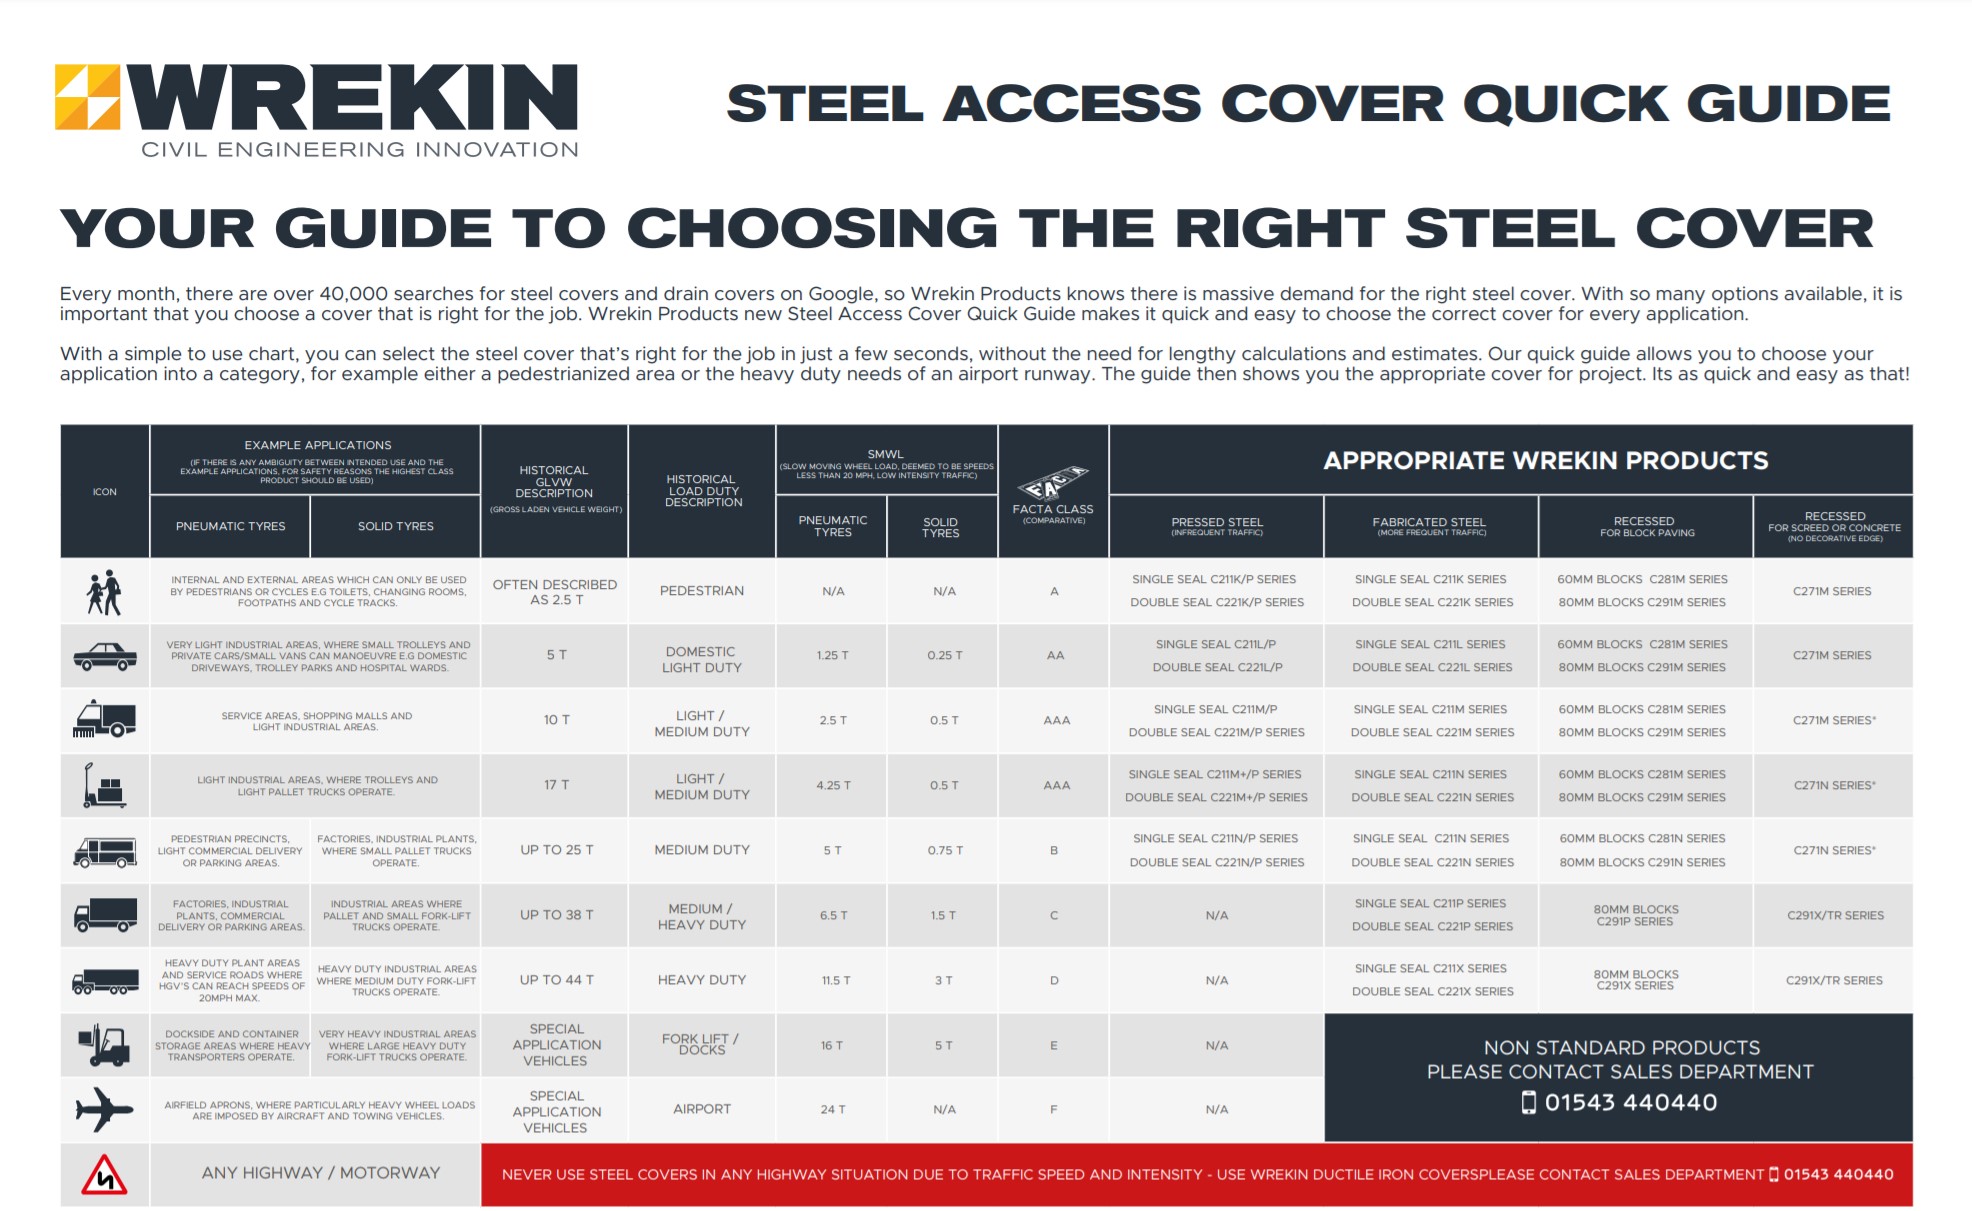 Choosing the right steel cover